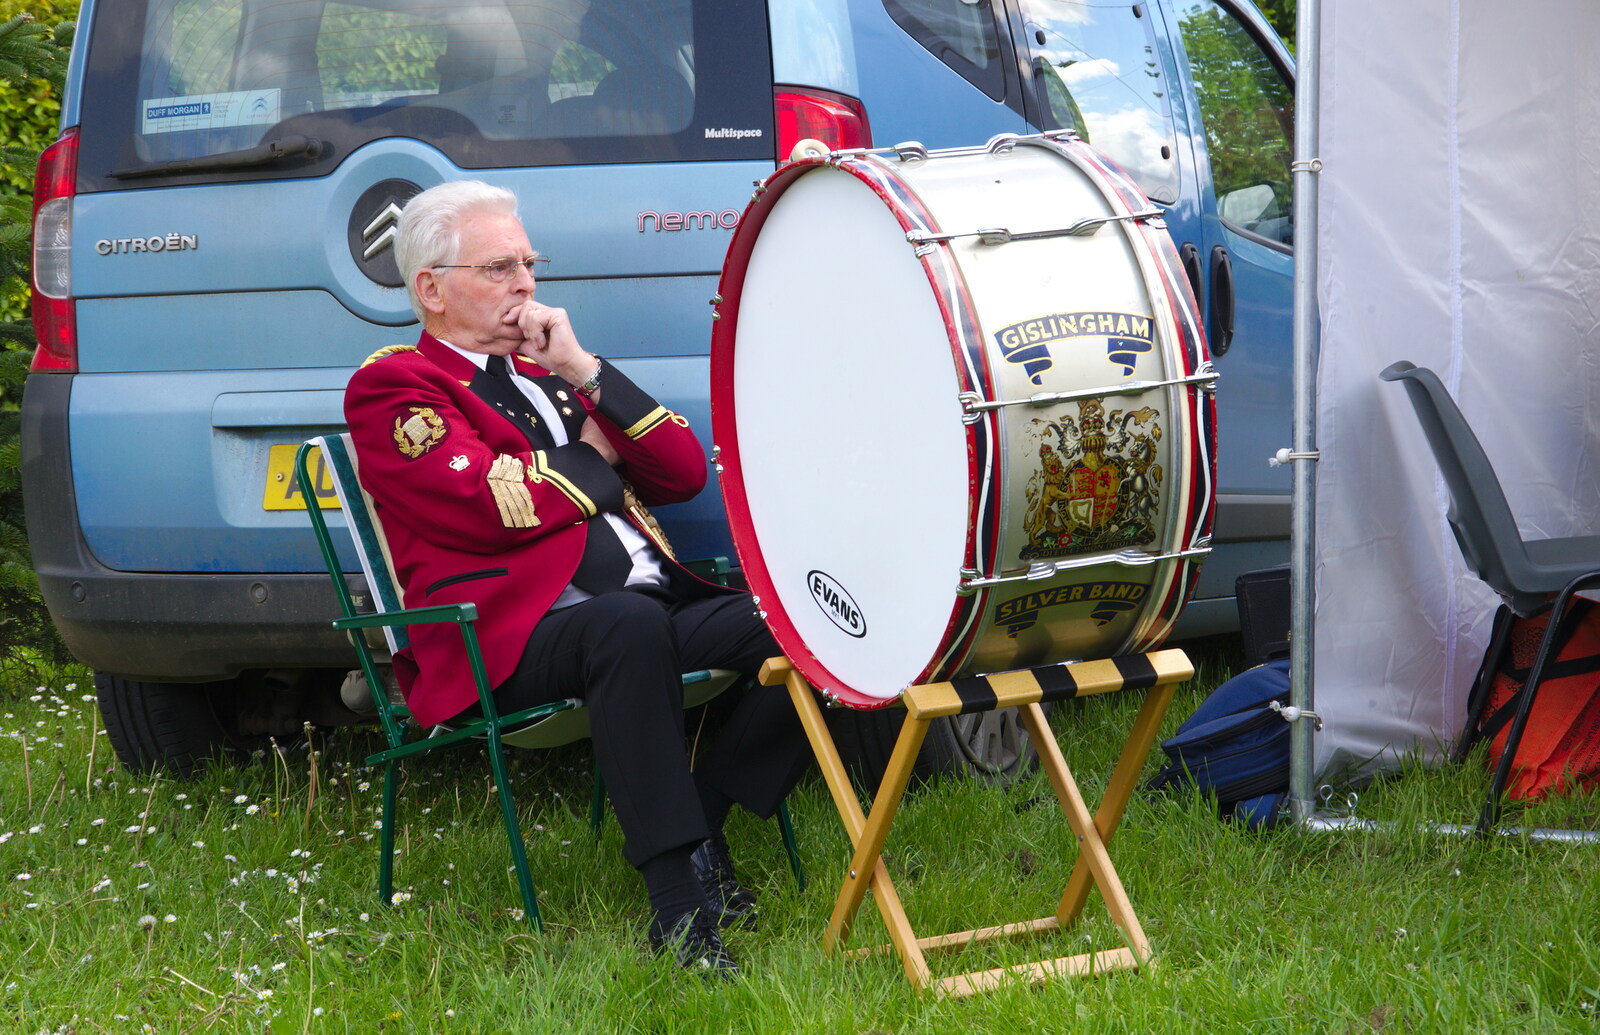 Terry the drum major waits for stuff to happen from The Gislingham Silver Band at the Village Hall, Gislingham, Suffolk - 12th May 2019